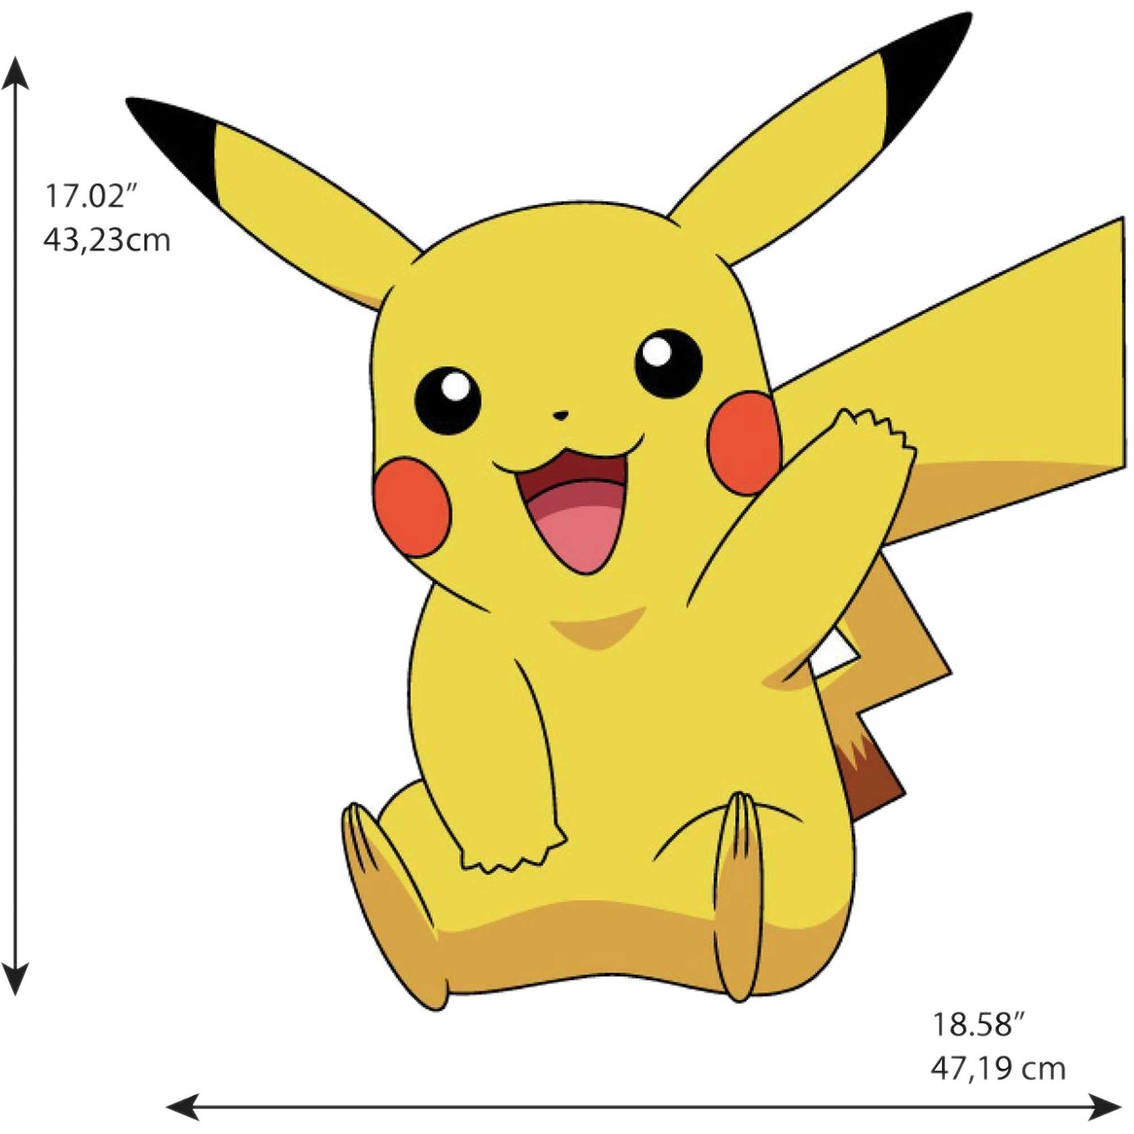 RoomMates Pikachu Peel and Stick Giant Wall Decals - Image 5 of 7